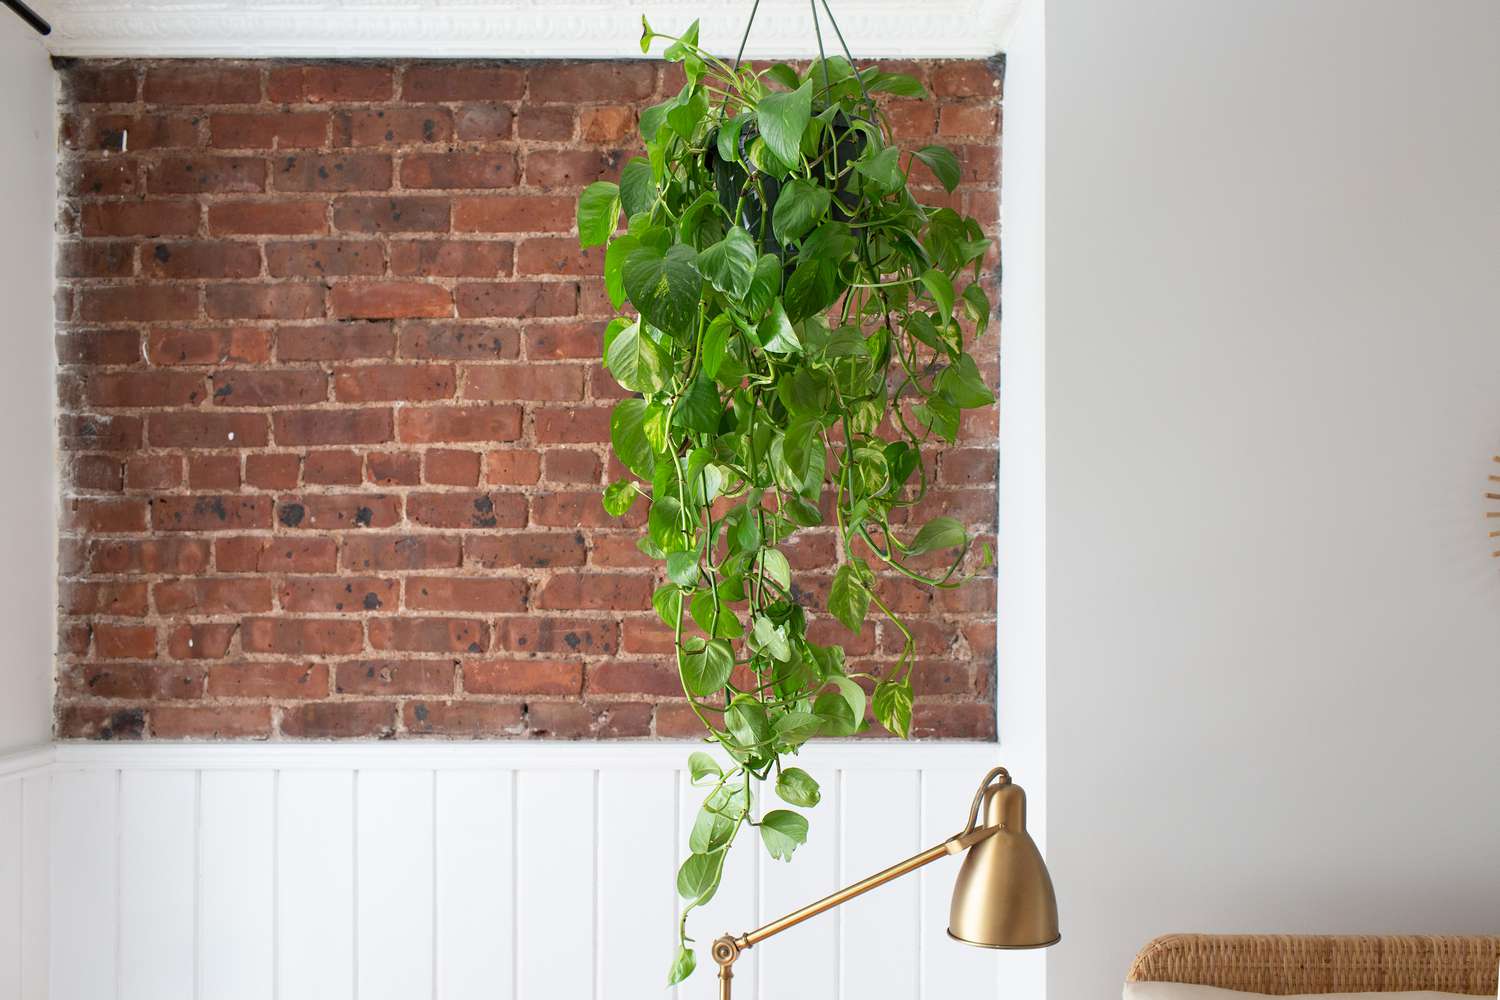 pothos hanging from the ceiling